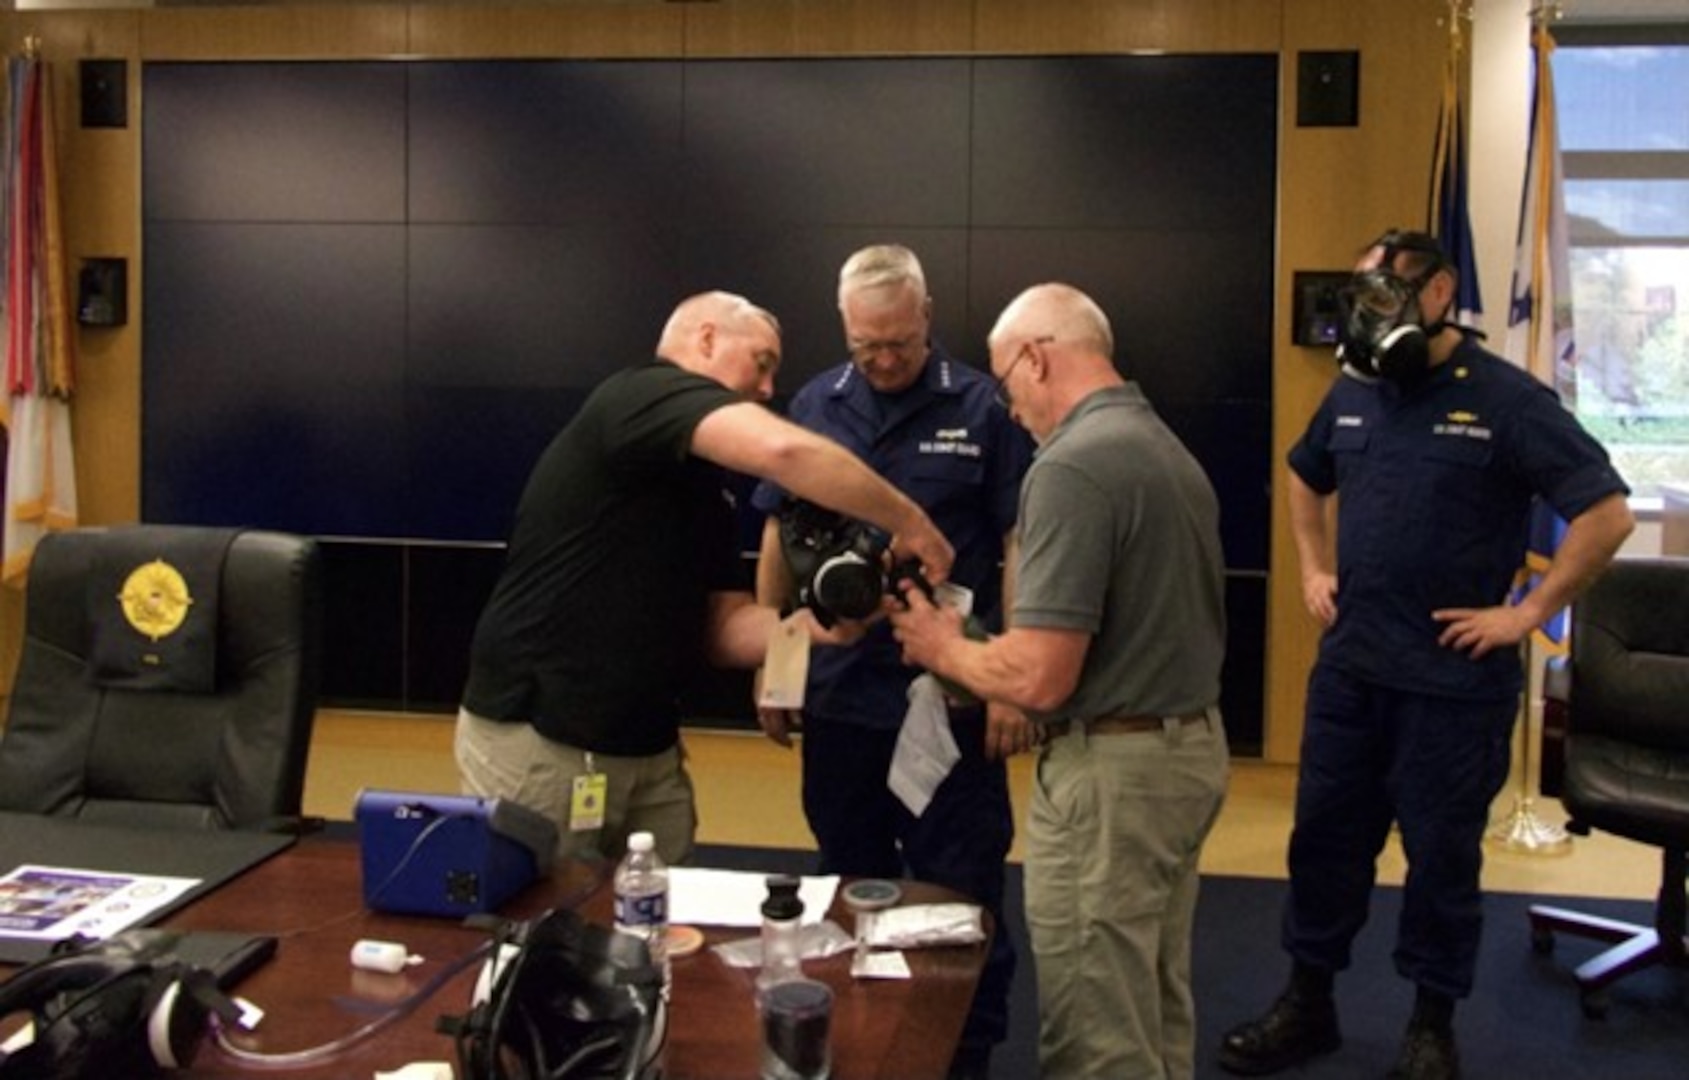 Vice Commandant Adm. Steve Poulin (center) gets fitted for a M-50 mask during a Chemical, Biological, Radiological, and Nuclear (CBRN) training session at Coast Guard Headquarters in September 2022. Poulin took part to remind CBRN-equipped units to complete required training to enhance readiness. (U.S. Coast Guard photo)